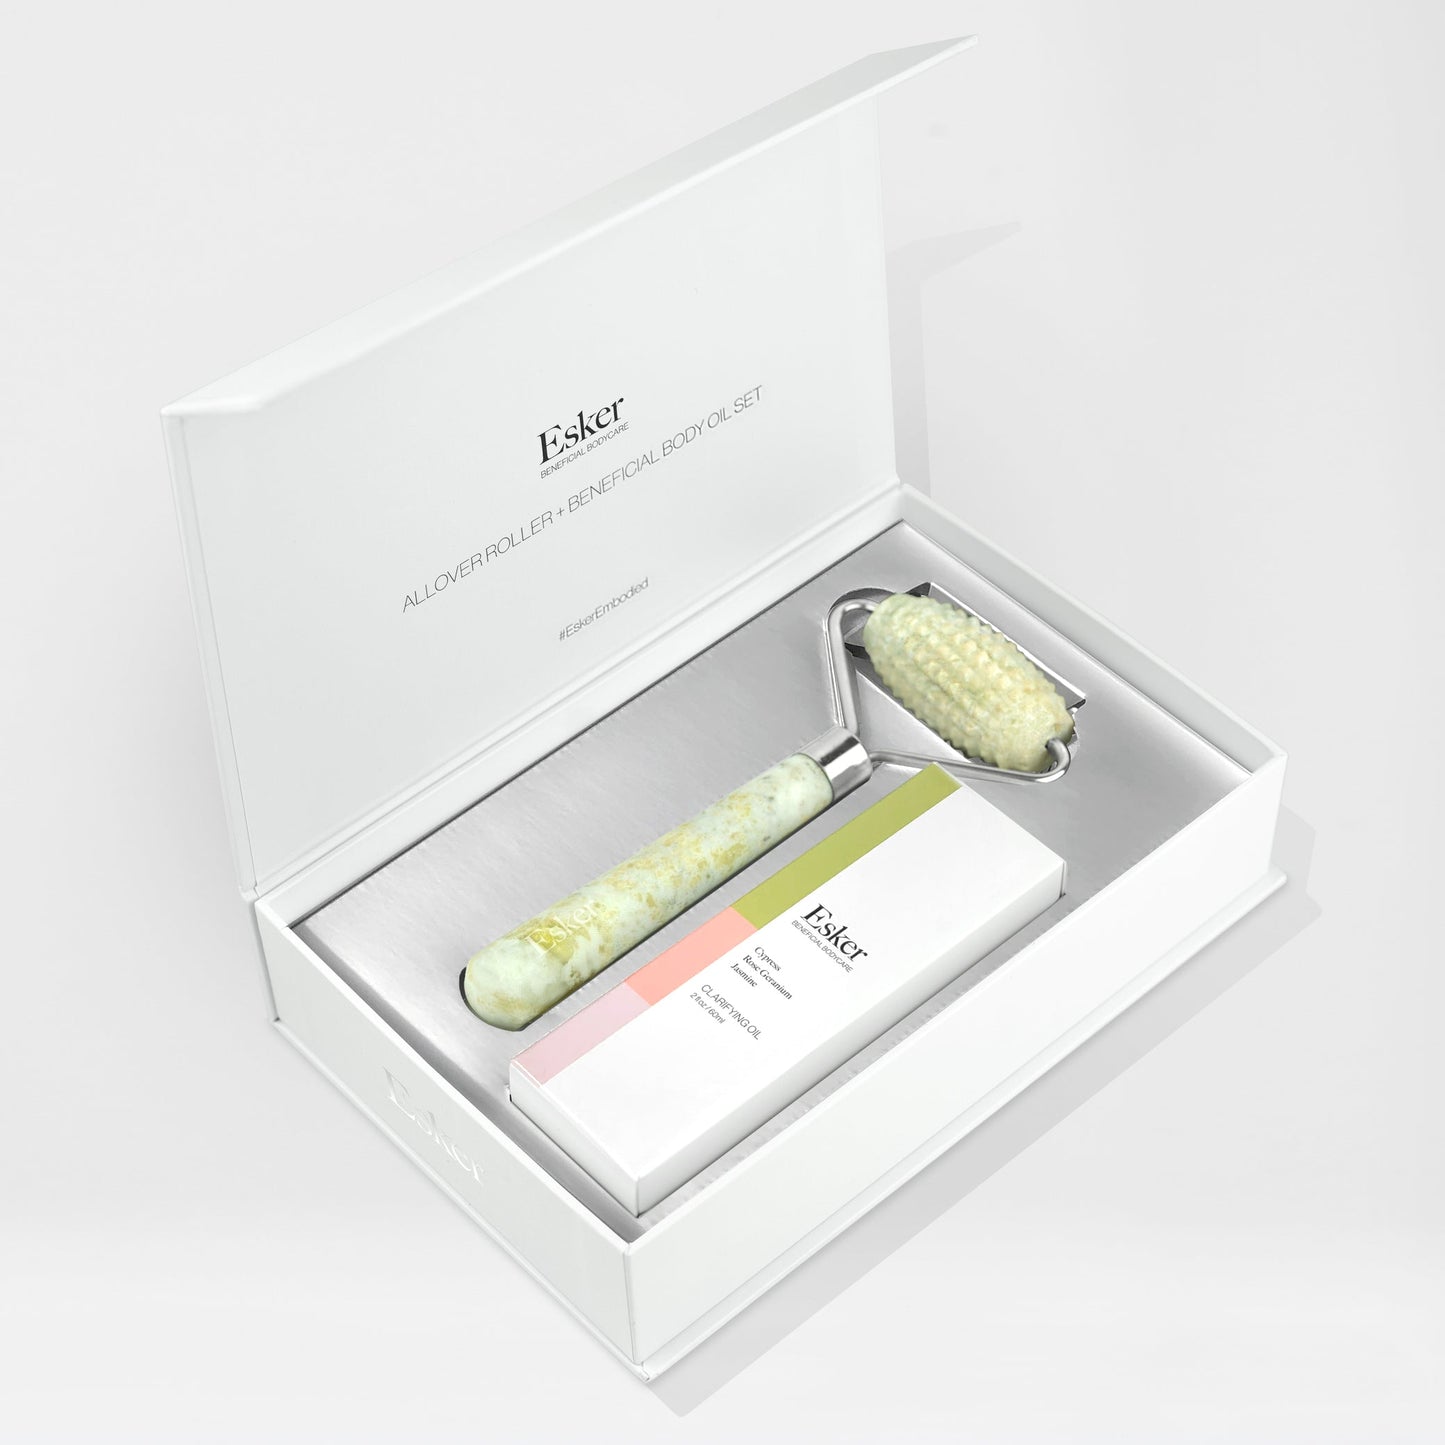 Esker’s Allover Roller and Clarifying Oil Duo in the box